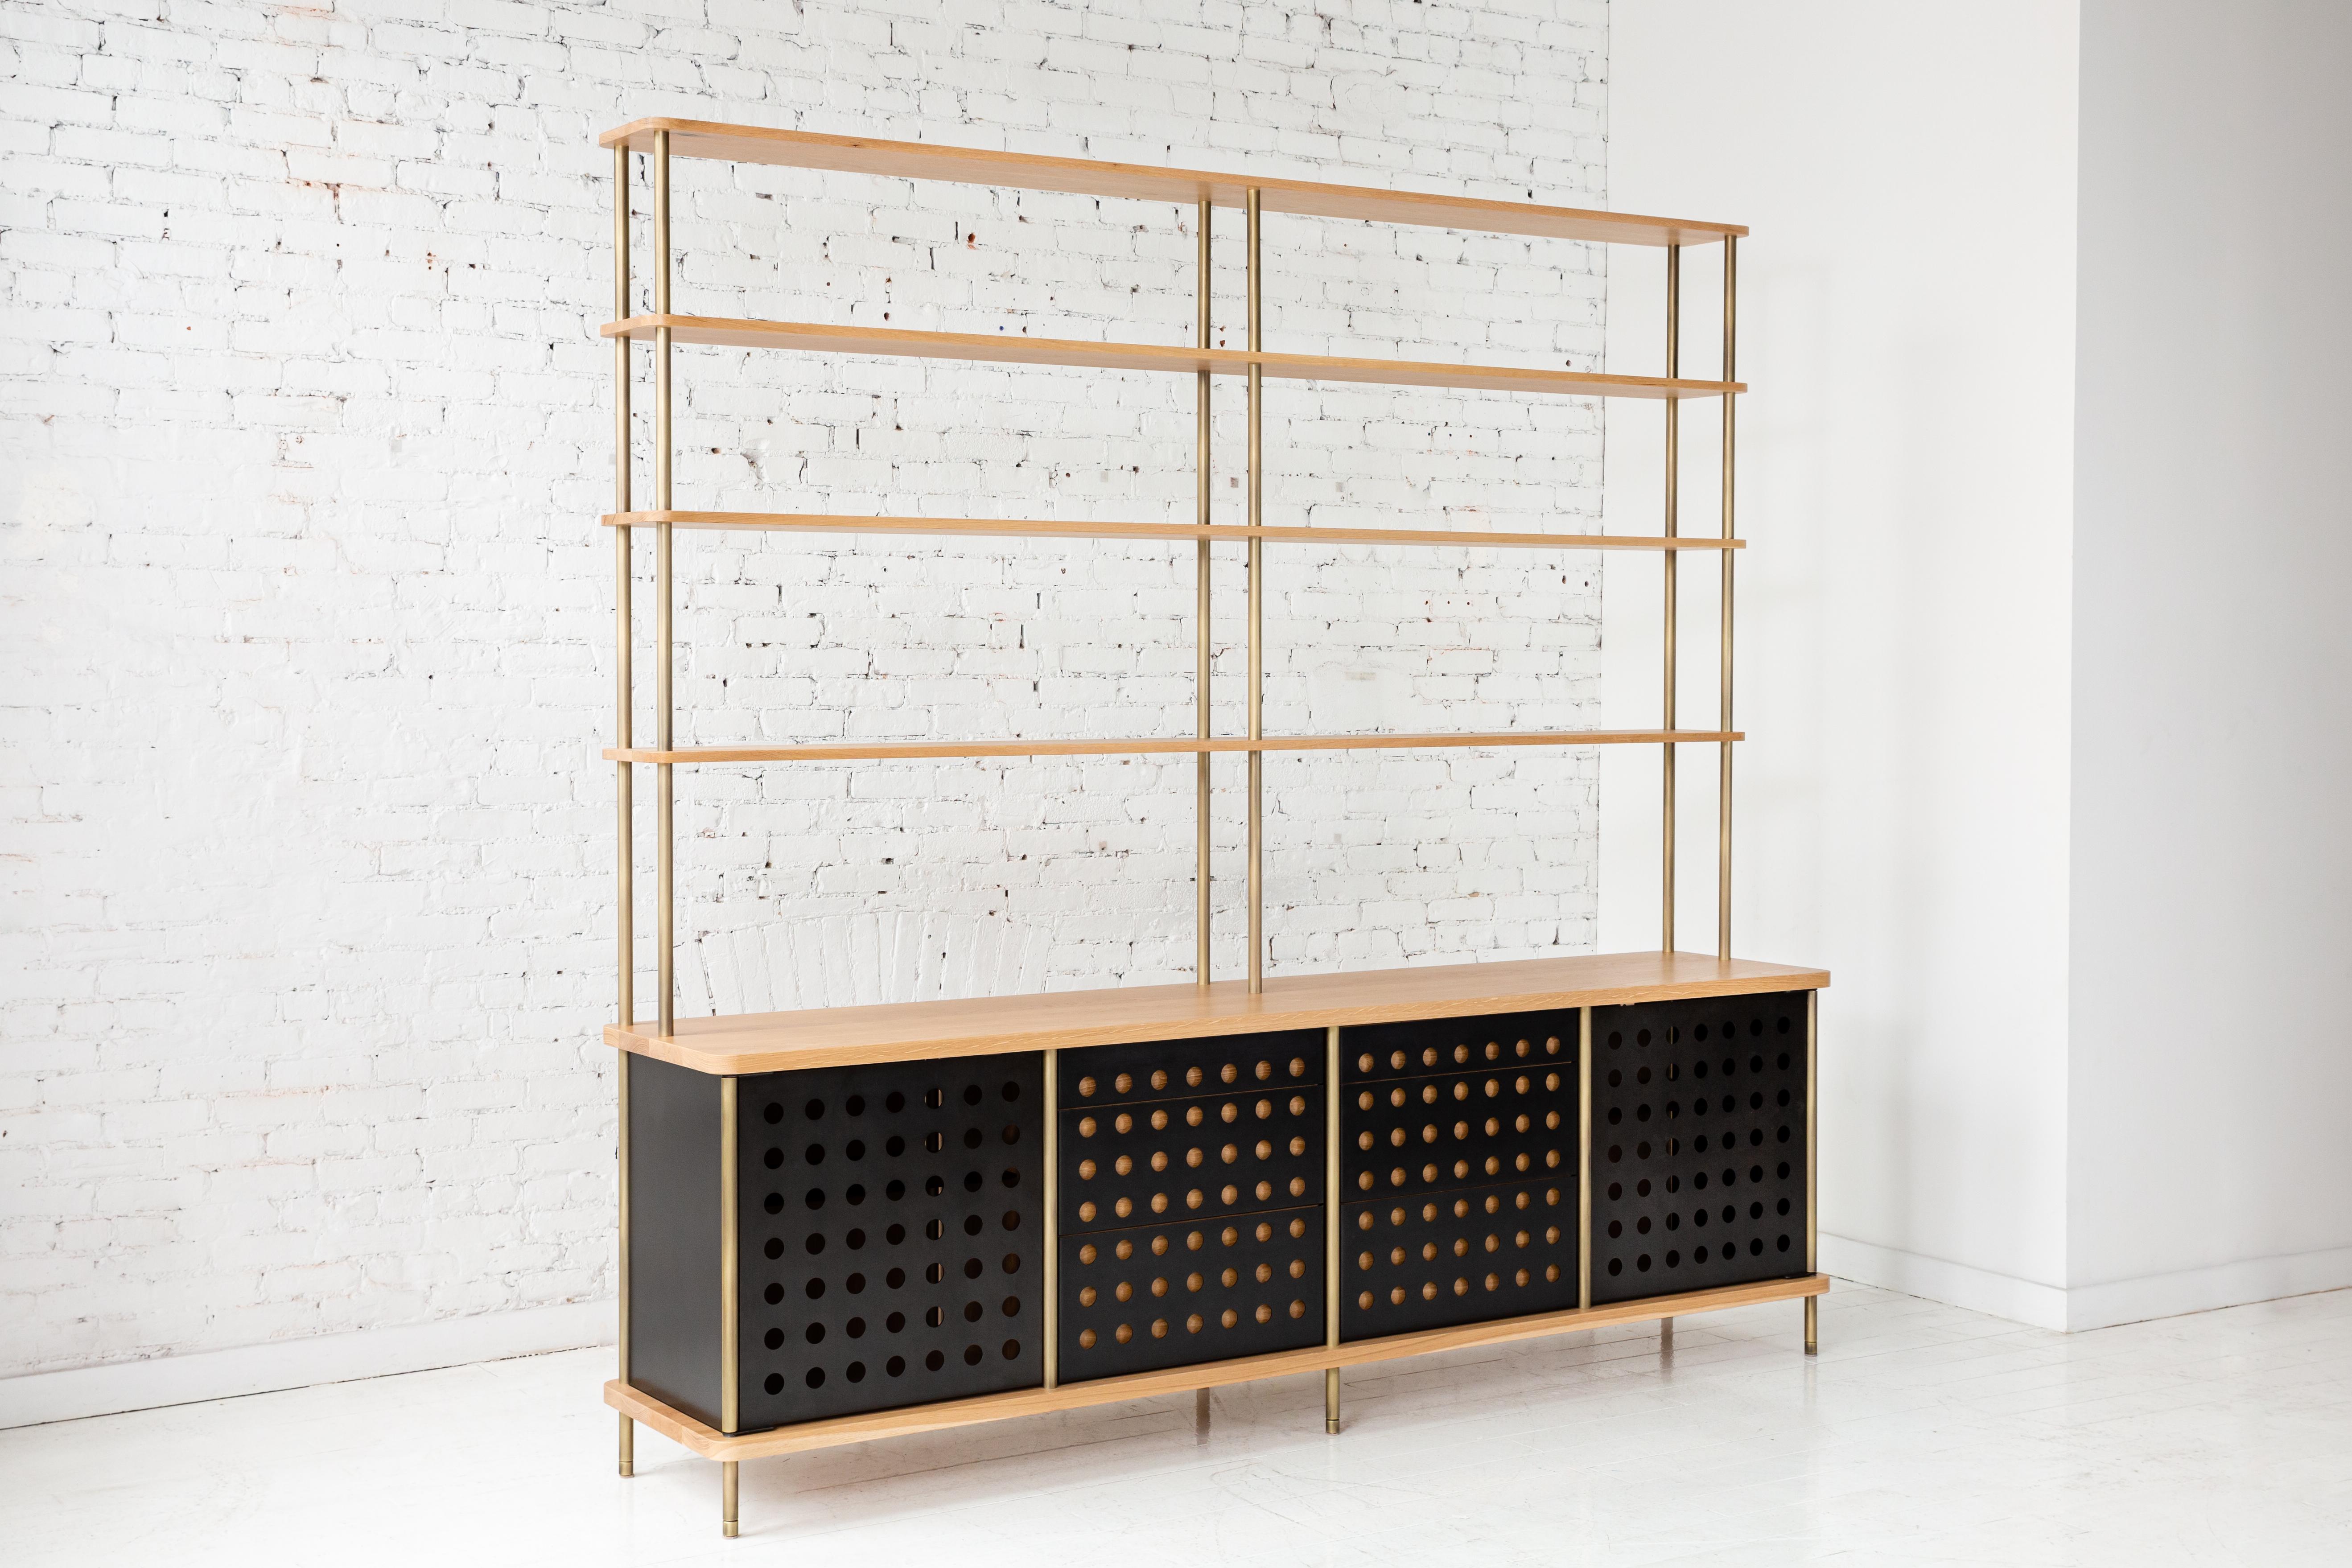 Consistent with the Strata collection, the new Strata sideboard is designed to be modular in order to create versatile configurations tailored to your needs. Shown with brass rods, walnut shelving and powder coated aluminum sliding doors, all